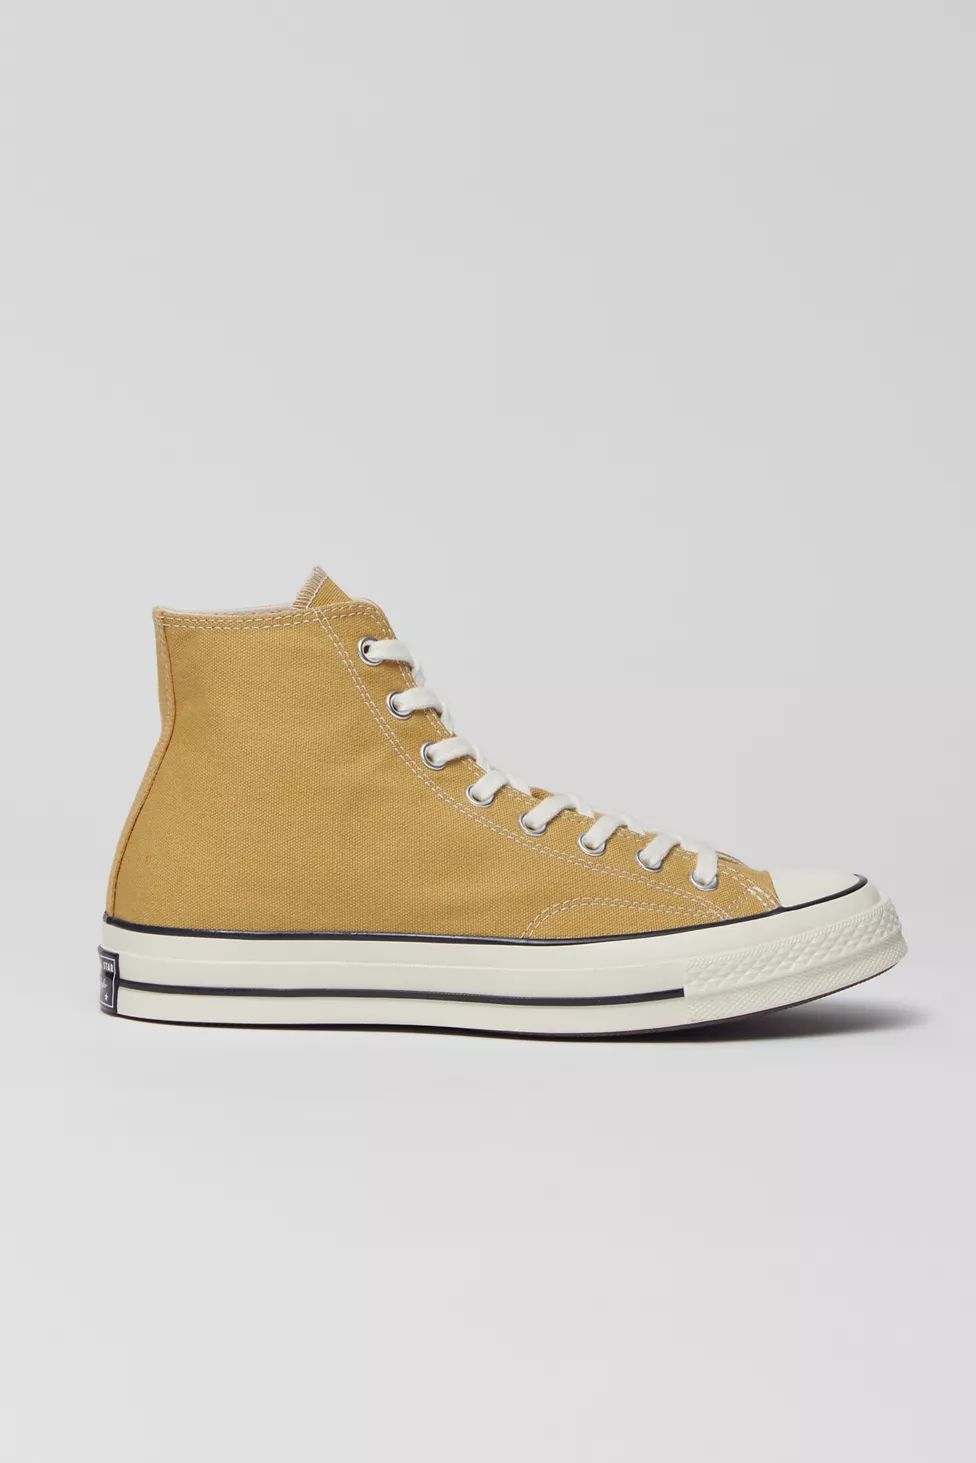 Converse Chuck 70 Fall Color High Top Sneaker | Urban Outfitters (US and RoW)